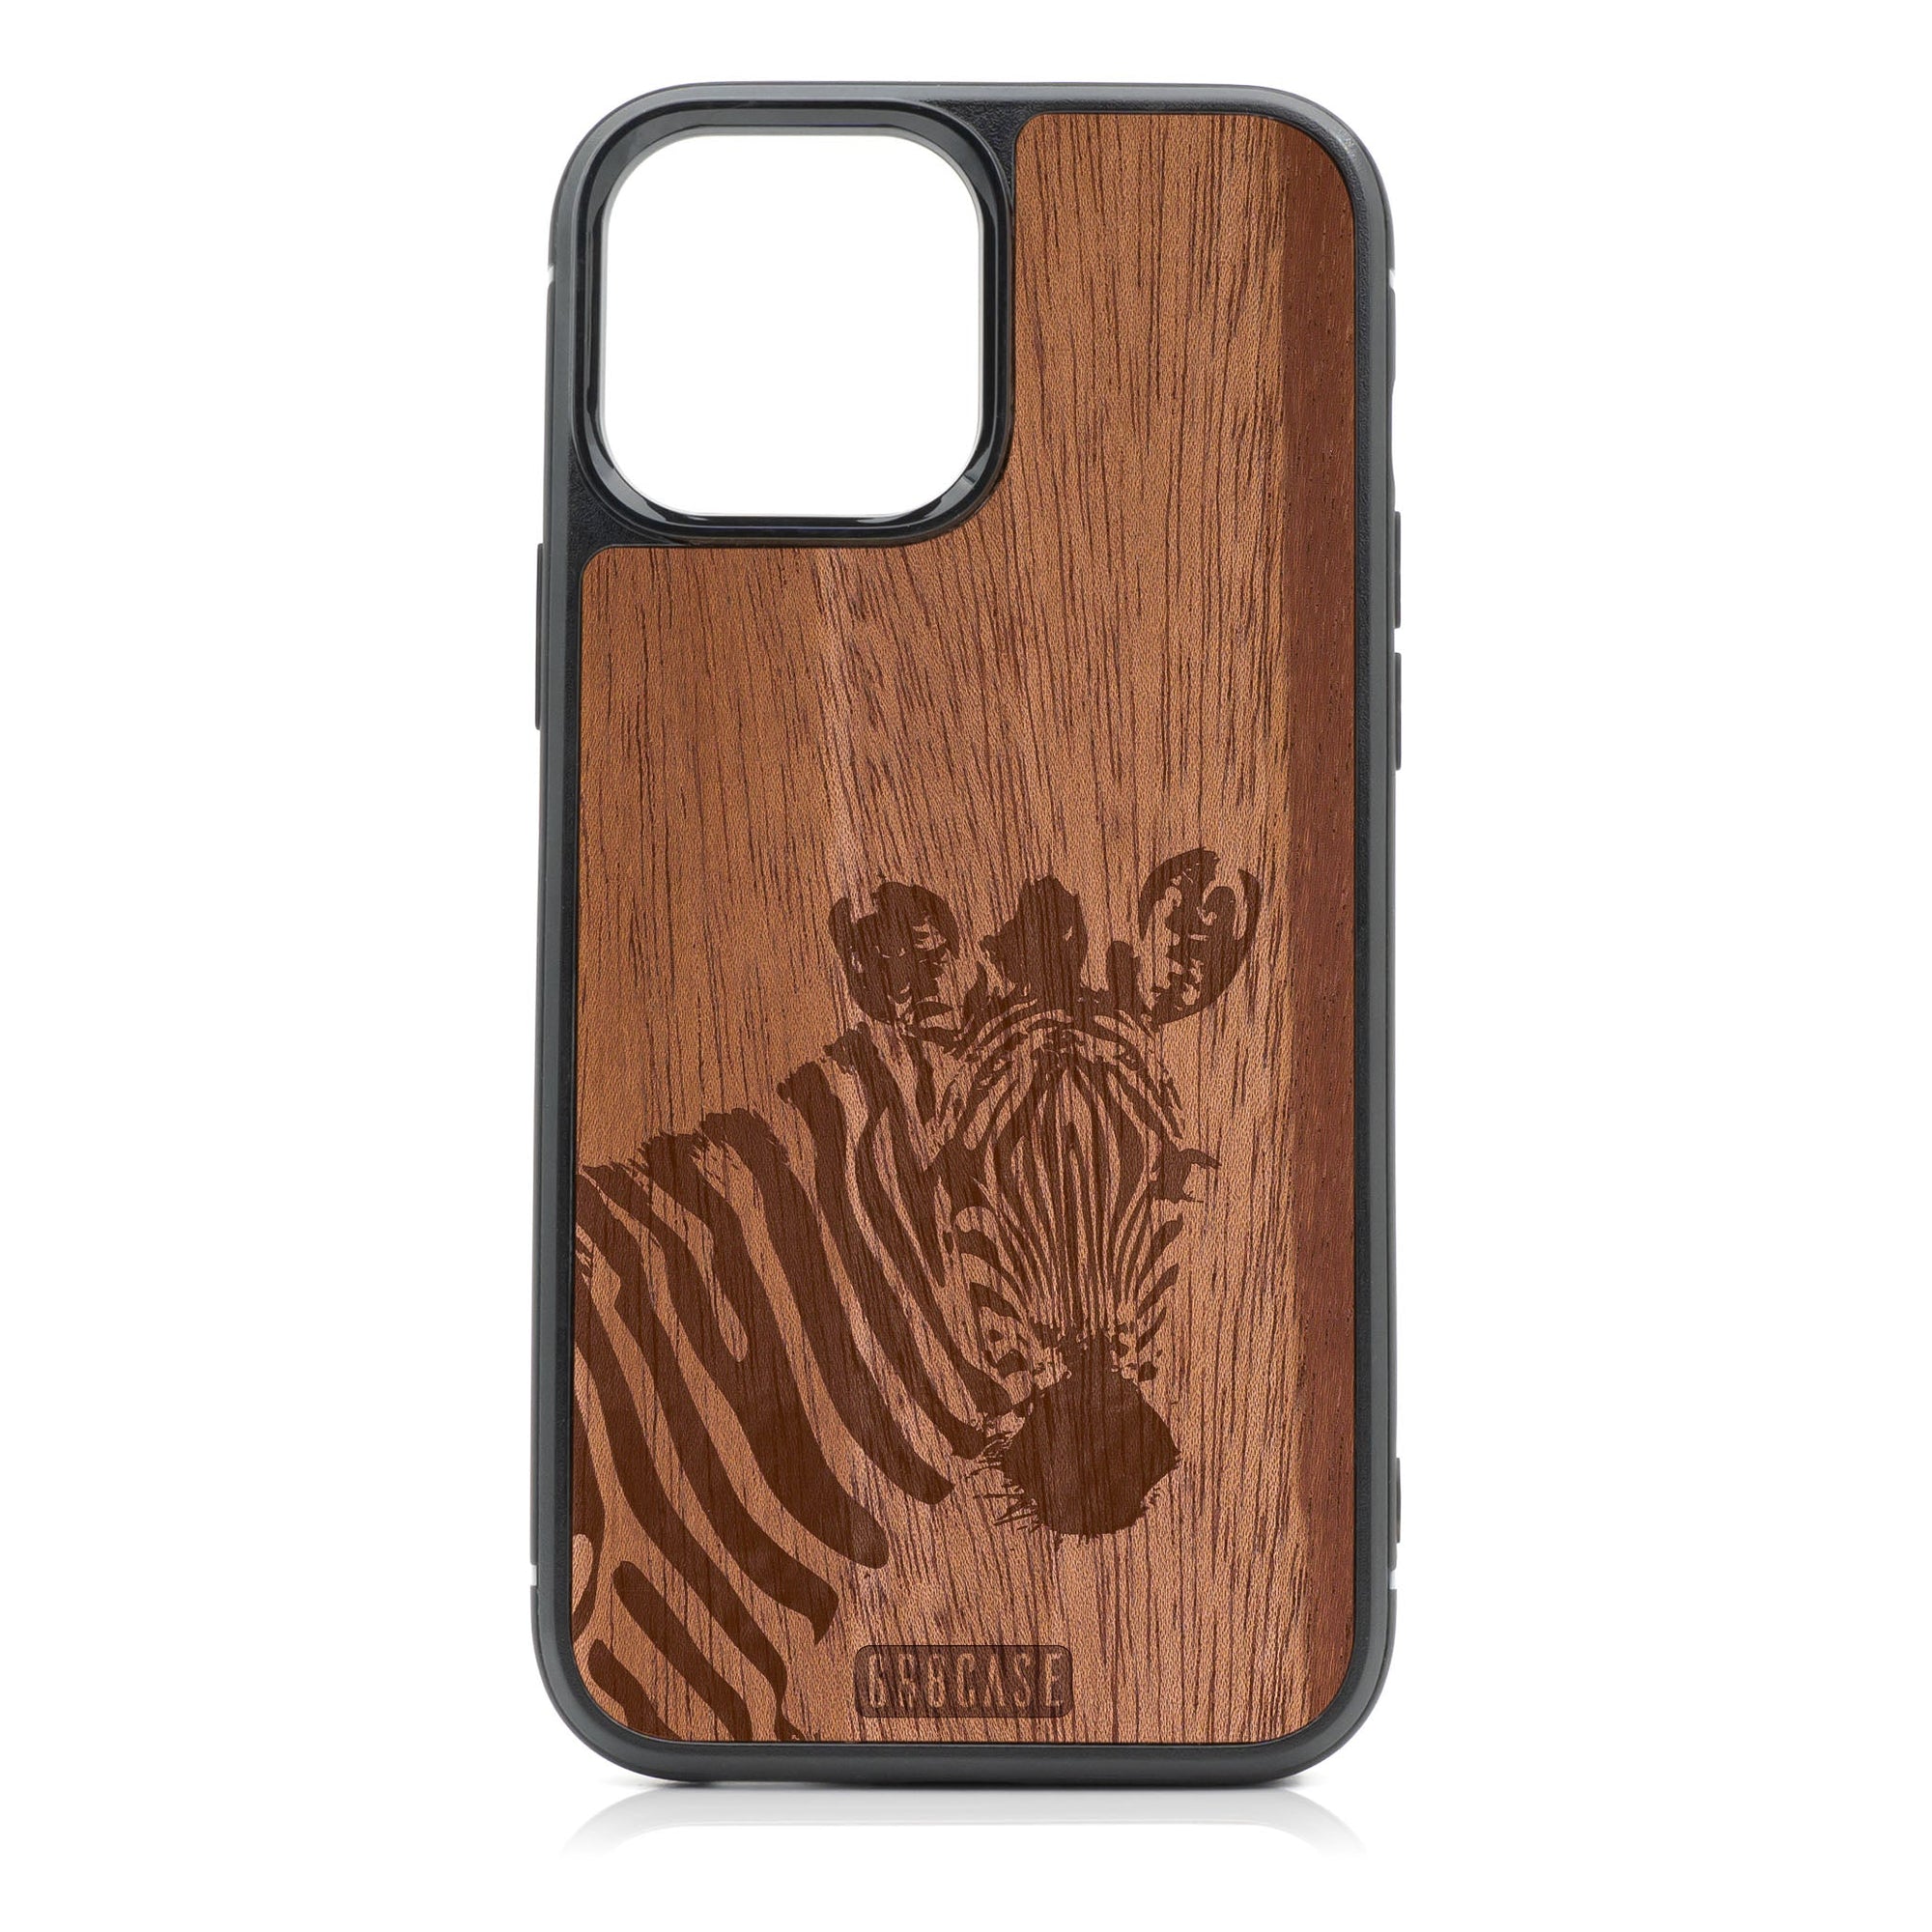 Lookout Zebra Design Wood Case For iPhone 14 Pro Max